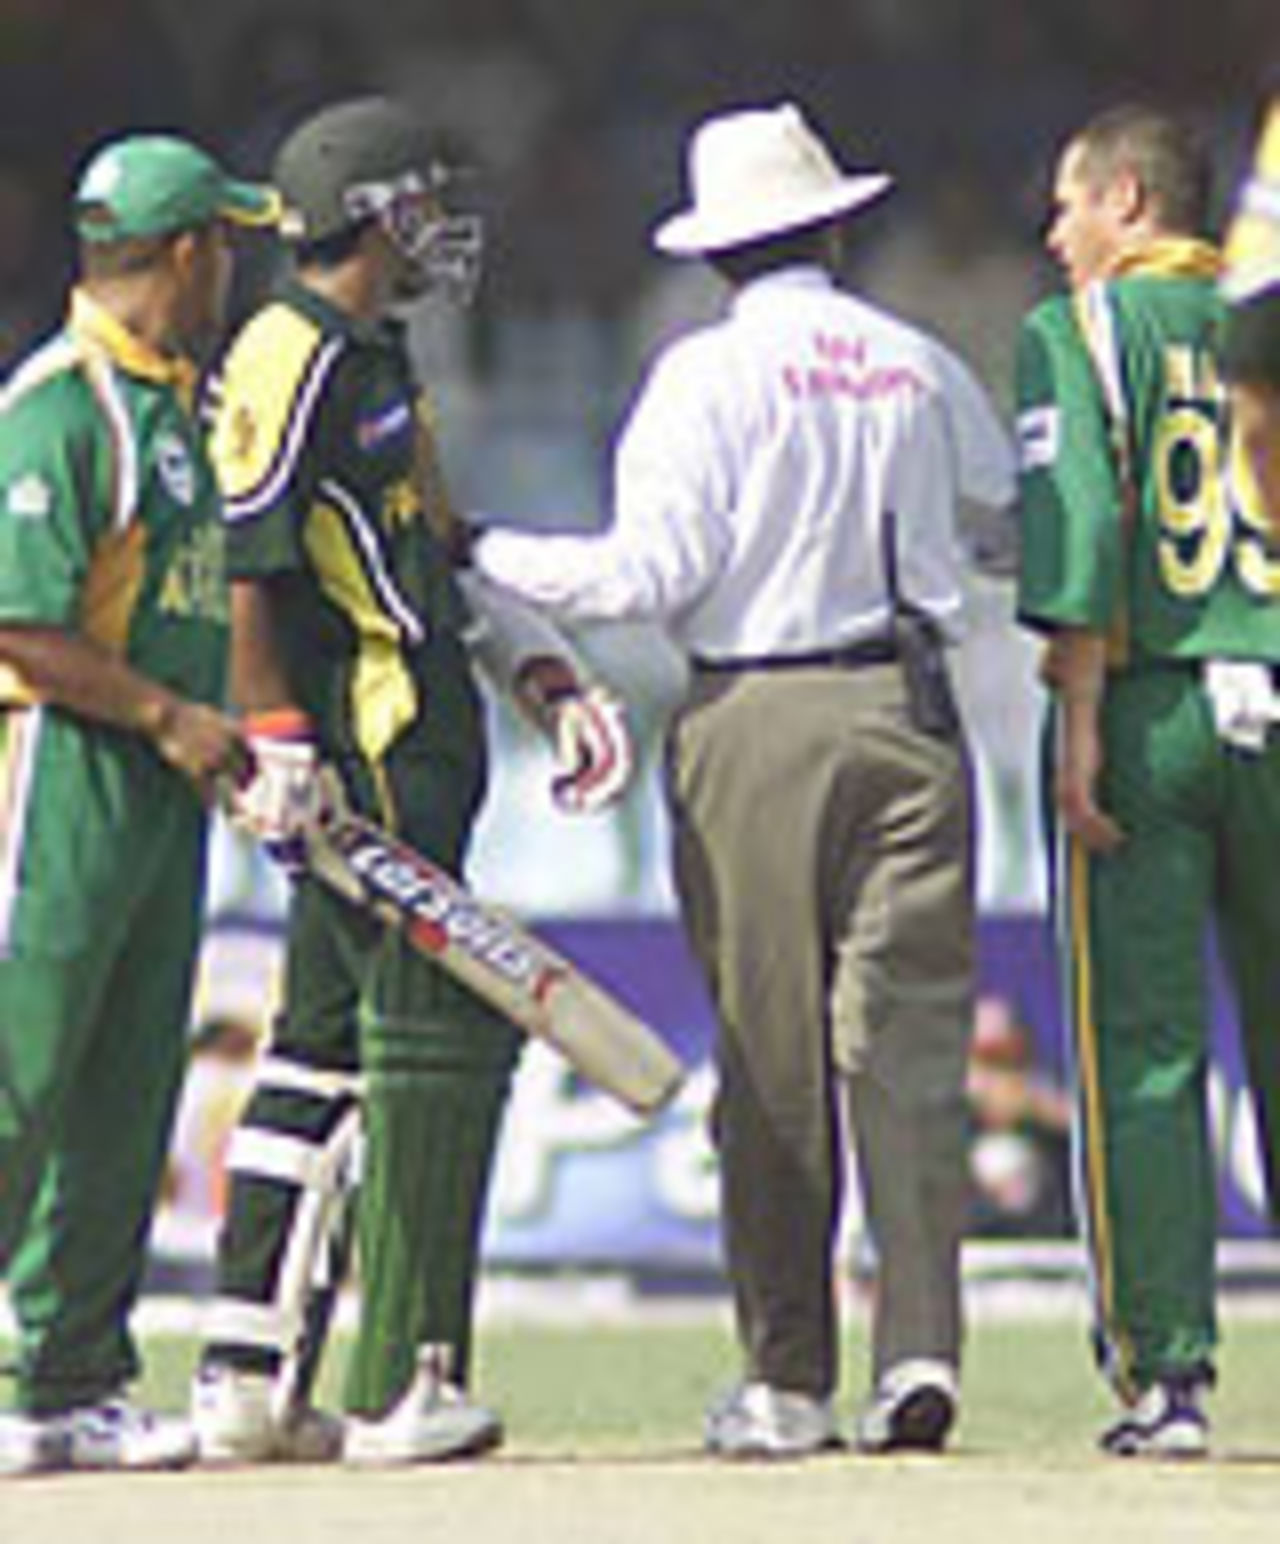 Umpire Nadeem Ghauri steps in to stop an altercation between Andrew Hall and Yousuf Youhana, Lahore, ODI2, Pakistan v South Africa, October 5, 2003.